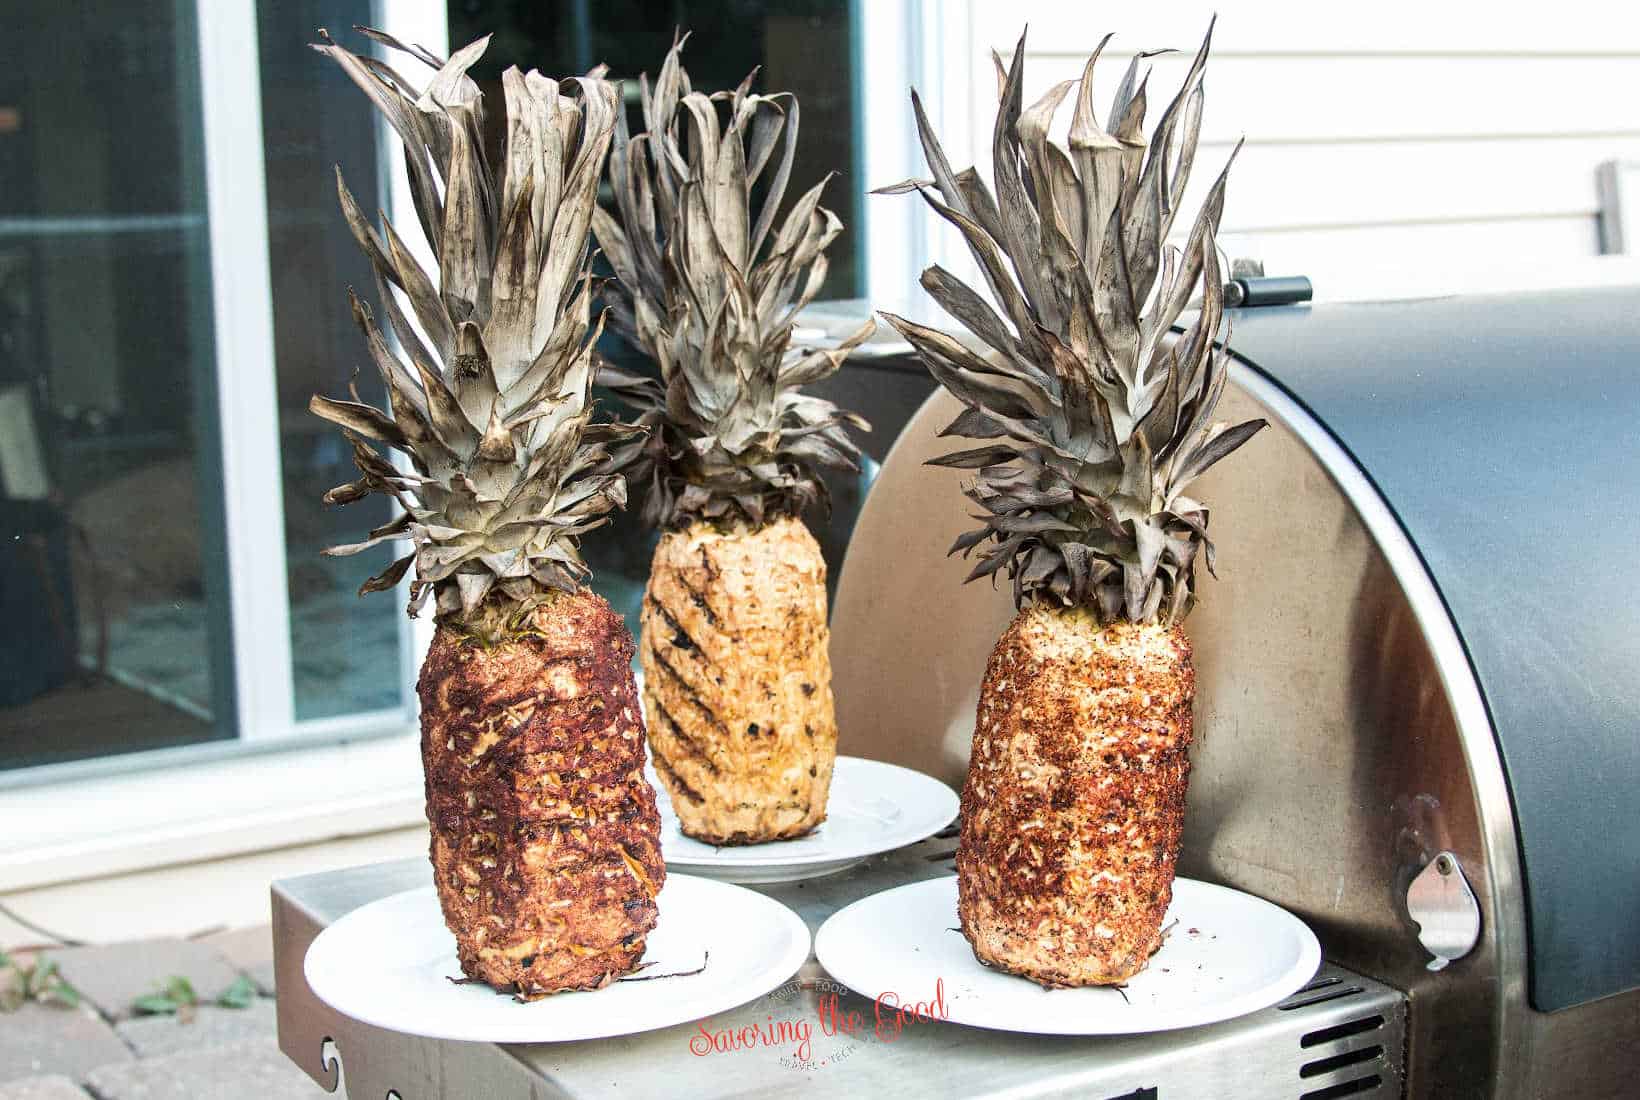 plain Smoked Pineapple, brown sugar and cinnamon Smoked Pineapple, and tajin Smoked Pineapple on white plates next to a smoker grill.